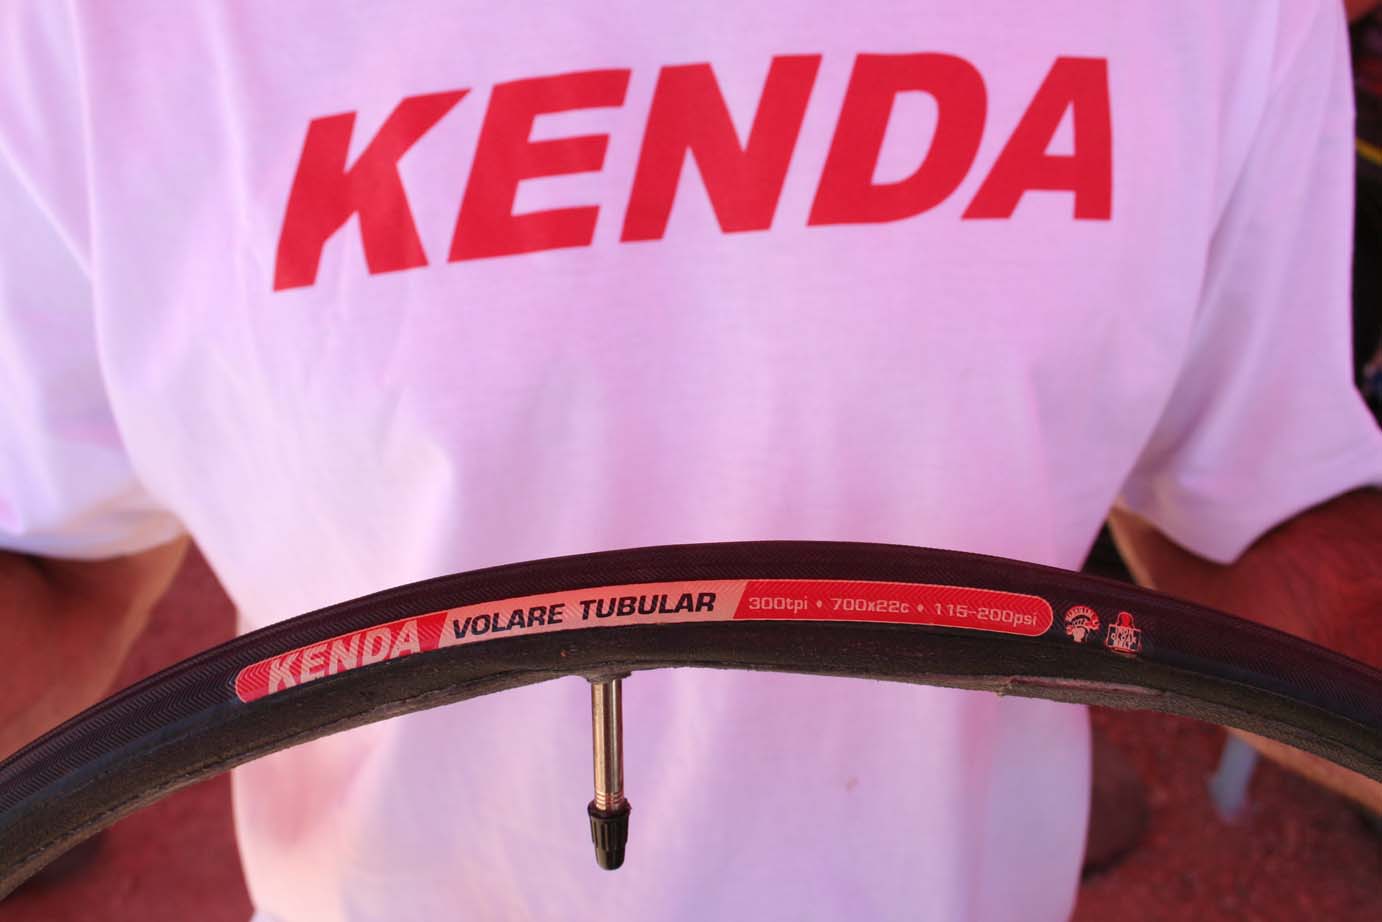 Kenda enters the road tubular market with three models, including its high-end 300 tpi Volare tubular with a latex intertube.